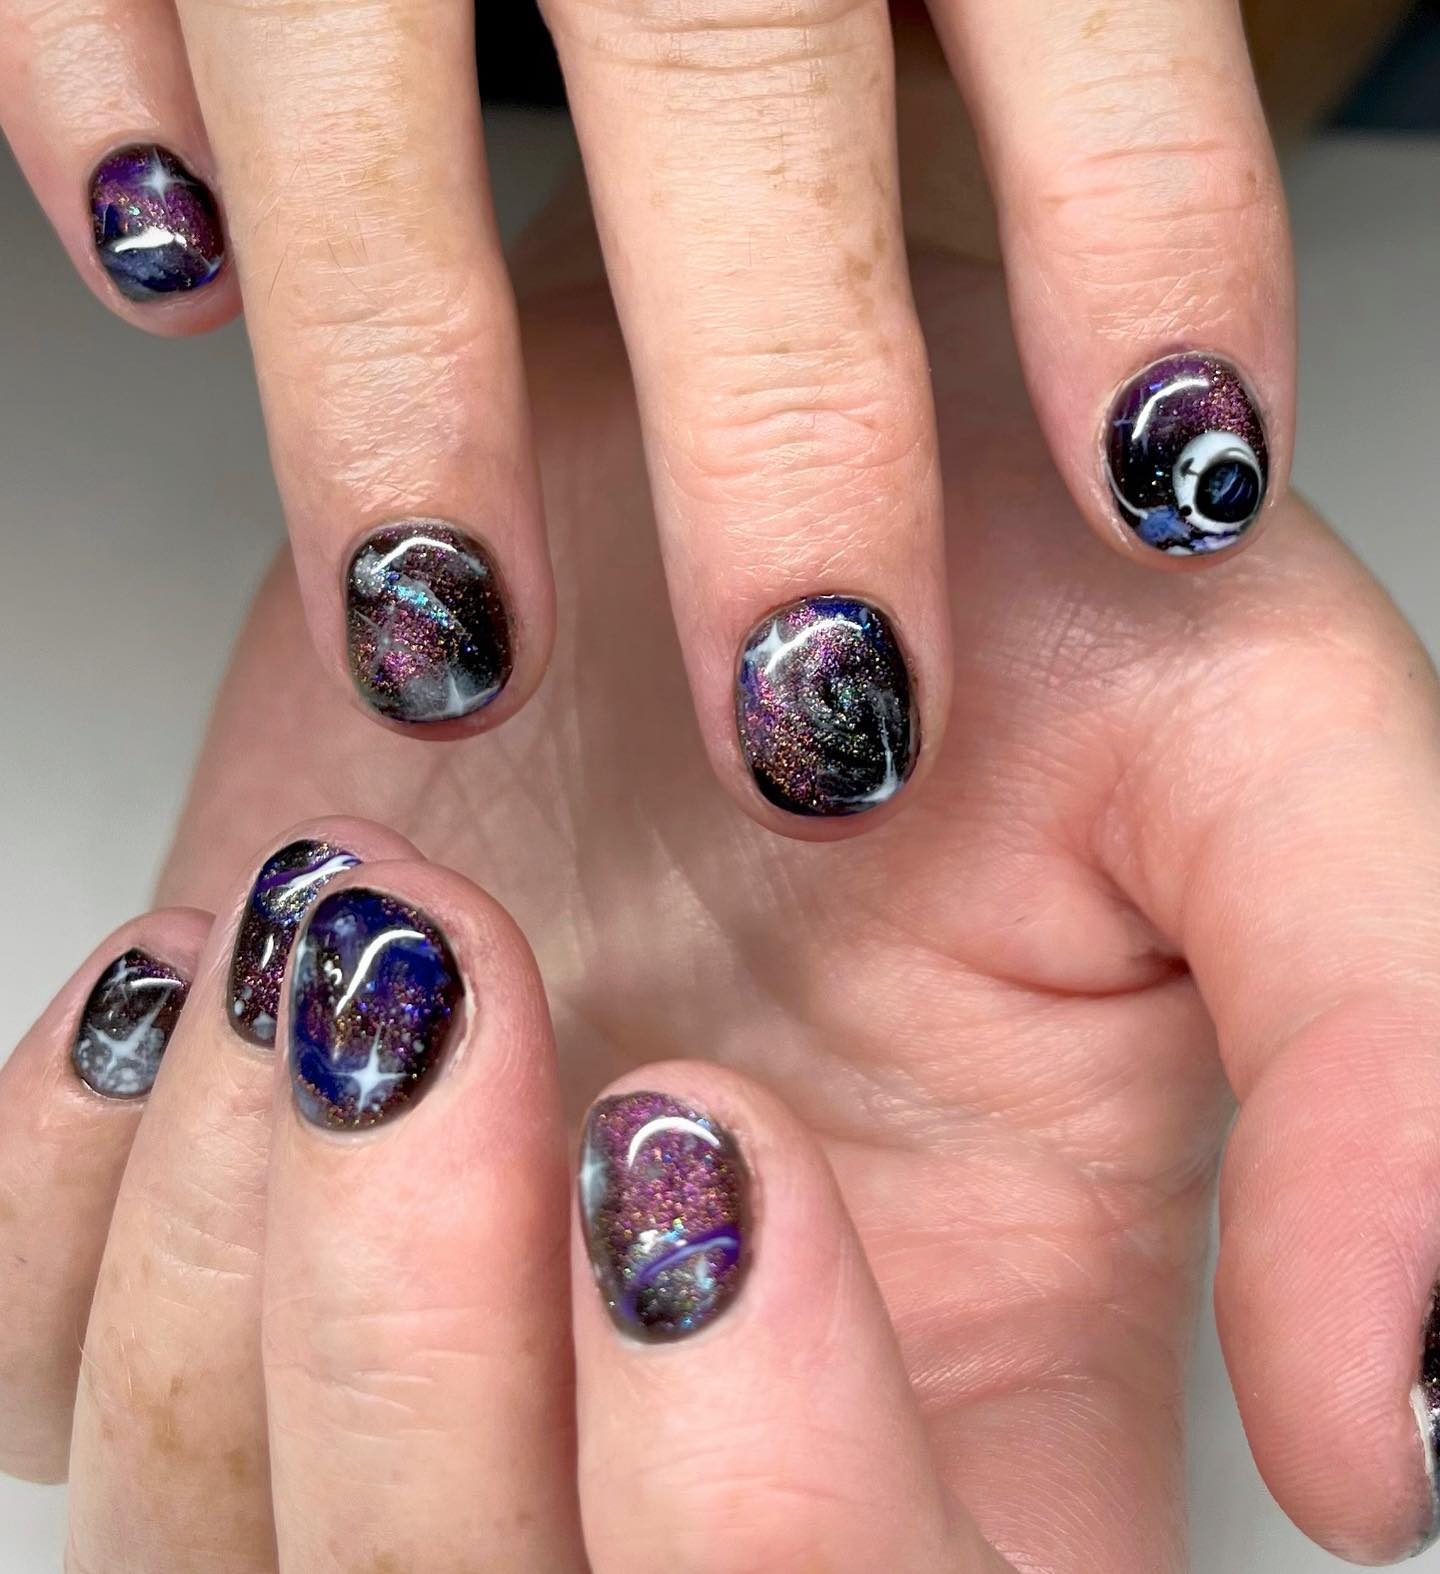 The space is full of galaxies, stars and mysteries. It amazes and inspires many people to design things with this look. So, why not applying a space cat eye nail design? You need to find a talented tattoo artist to get it.